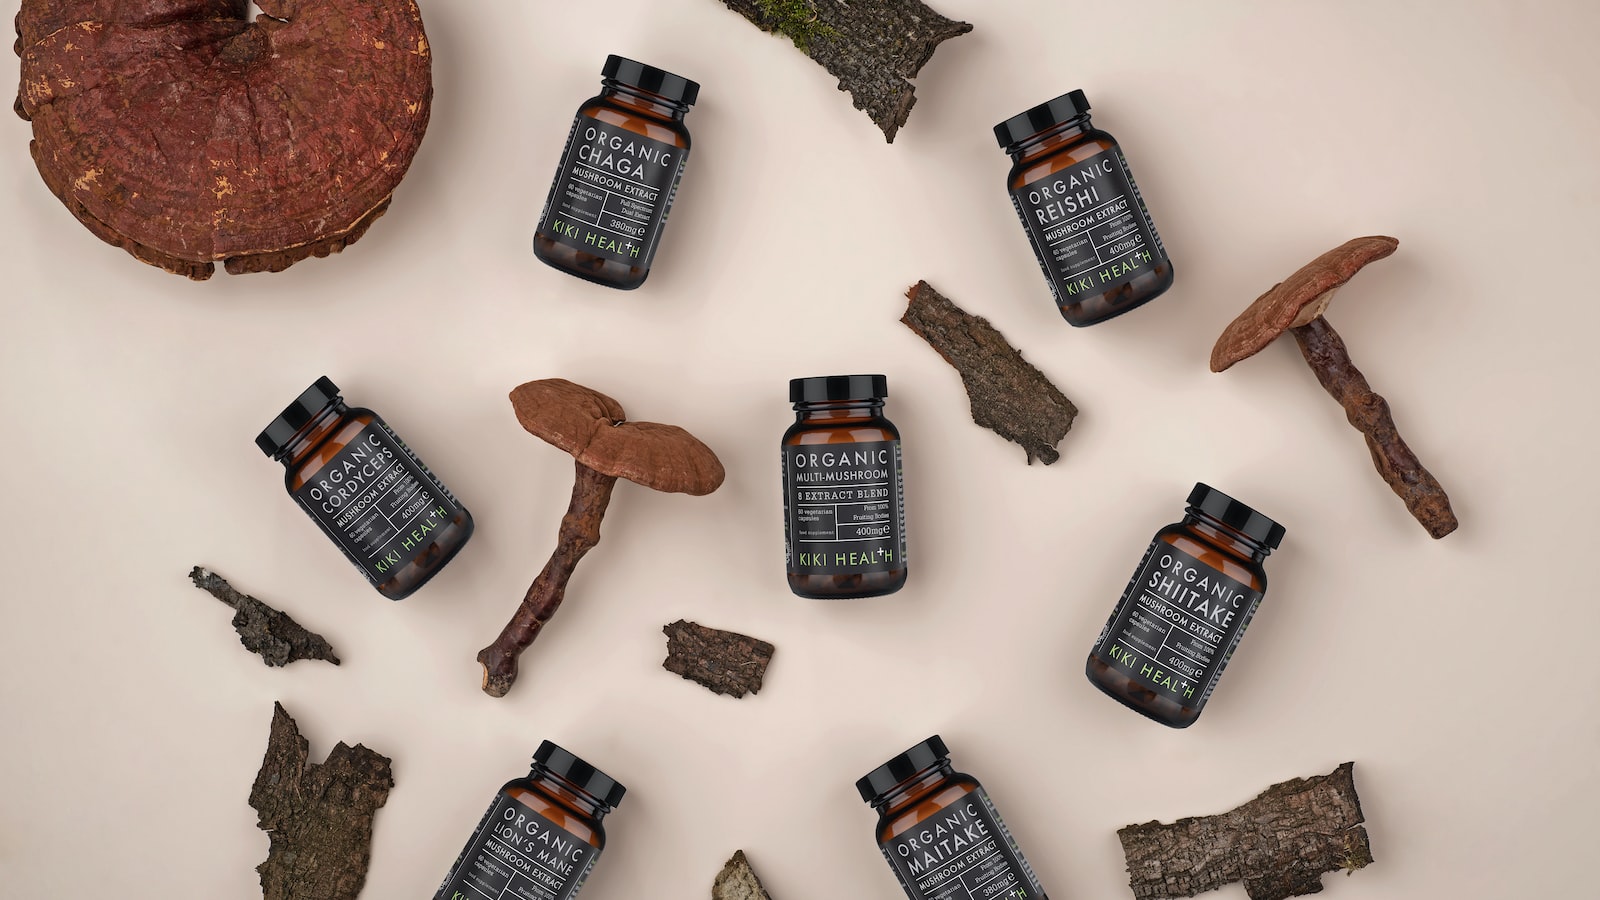 4. Chaga Mushrooms and Their Role in Fighting Inflammation and Oxidative Stress